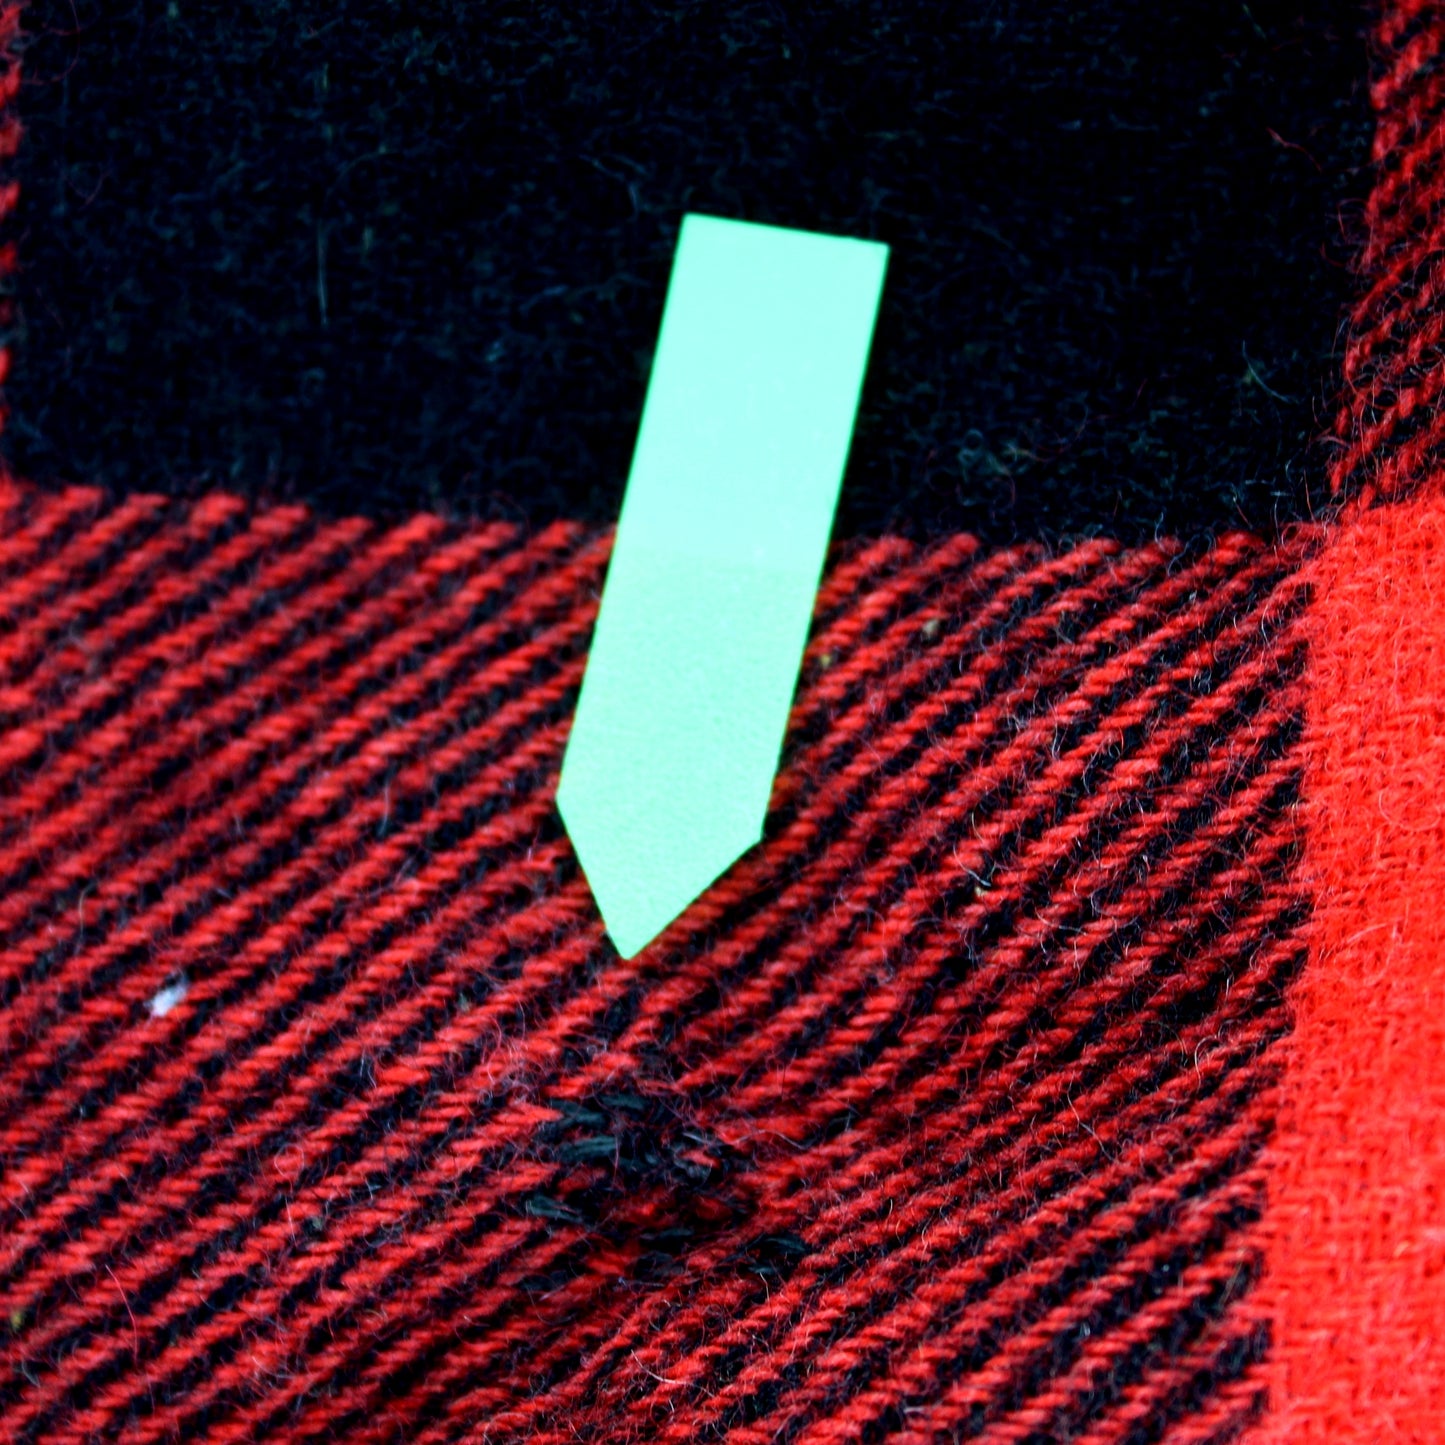 Double Length Wool Blanket Cabin Camp Red Black Check 67" X 154" closeup of repair